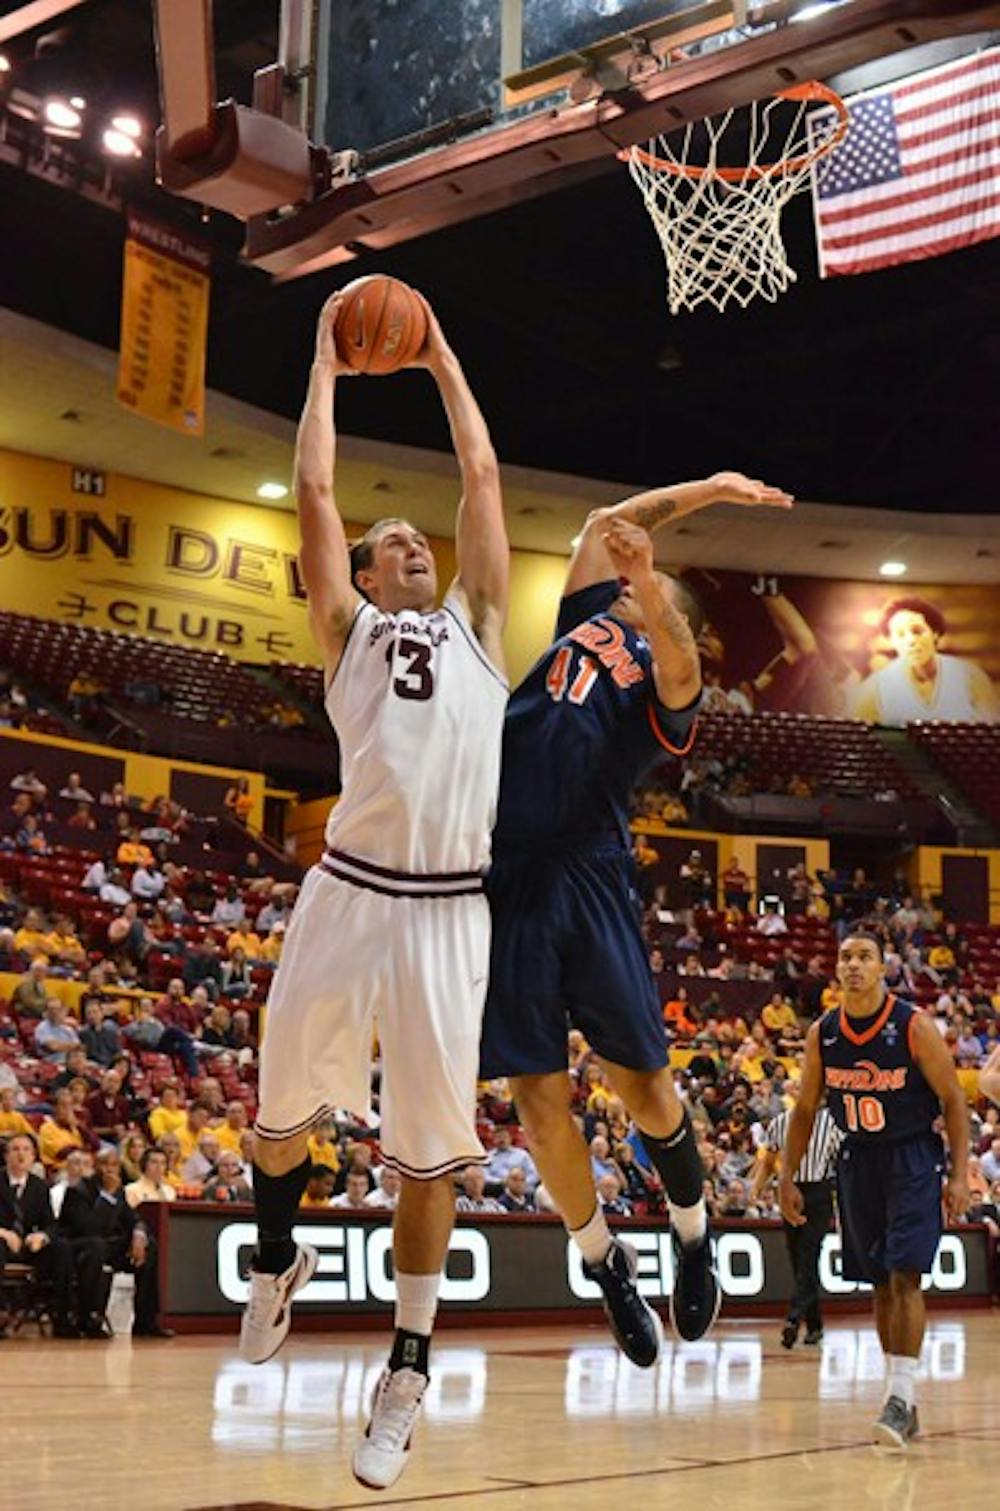 NOT ENOUGH: ASU sophomore center Jordan Bachynski tries to work past senior forward Taylor Darby during the Sun Devils’ 66-60 loss to the Waves on Tuesday. ASU coach Herb Sendek brought in Bachynski and freshman guard Max Heller to try to spark the Sun Devils in the second half, but the surge came up short. (Photo by Aaron Lavinsky)